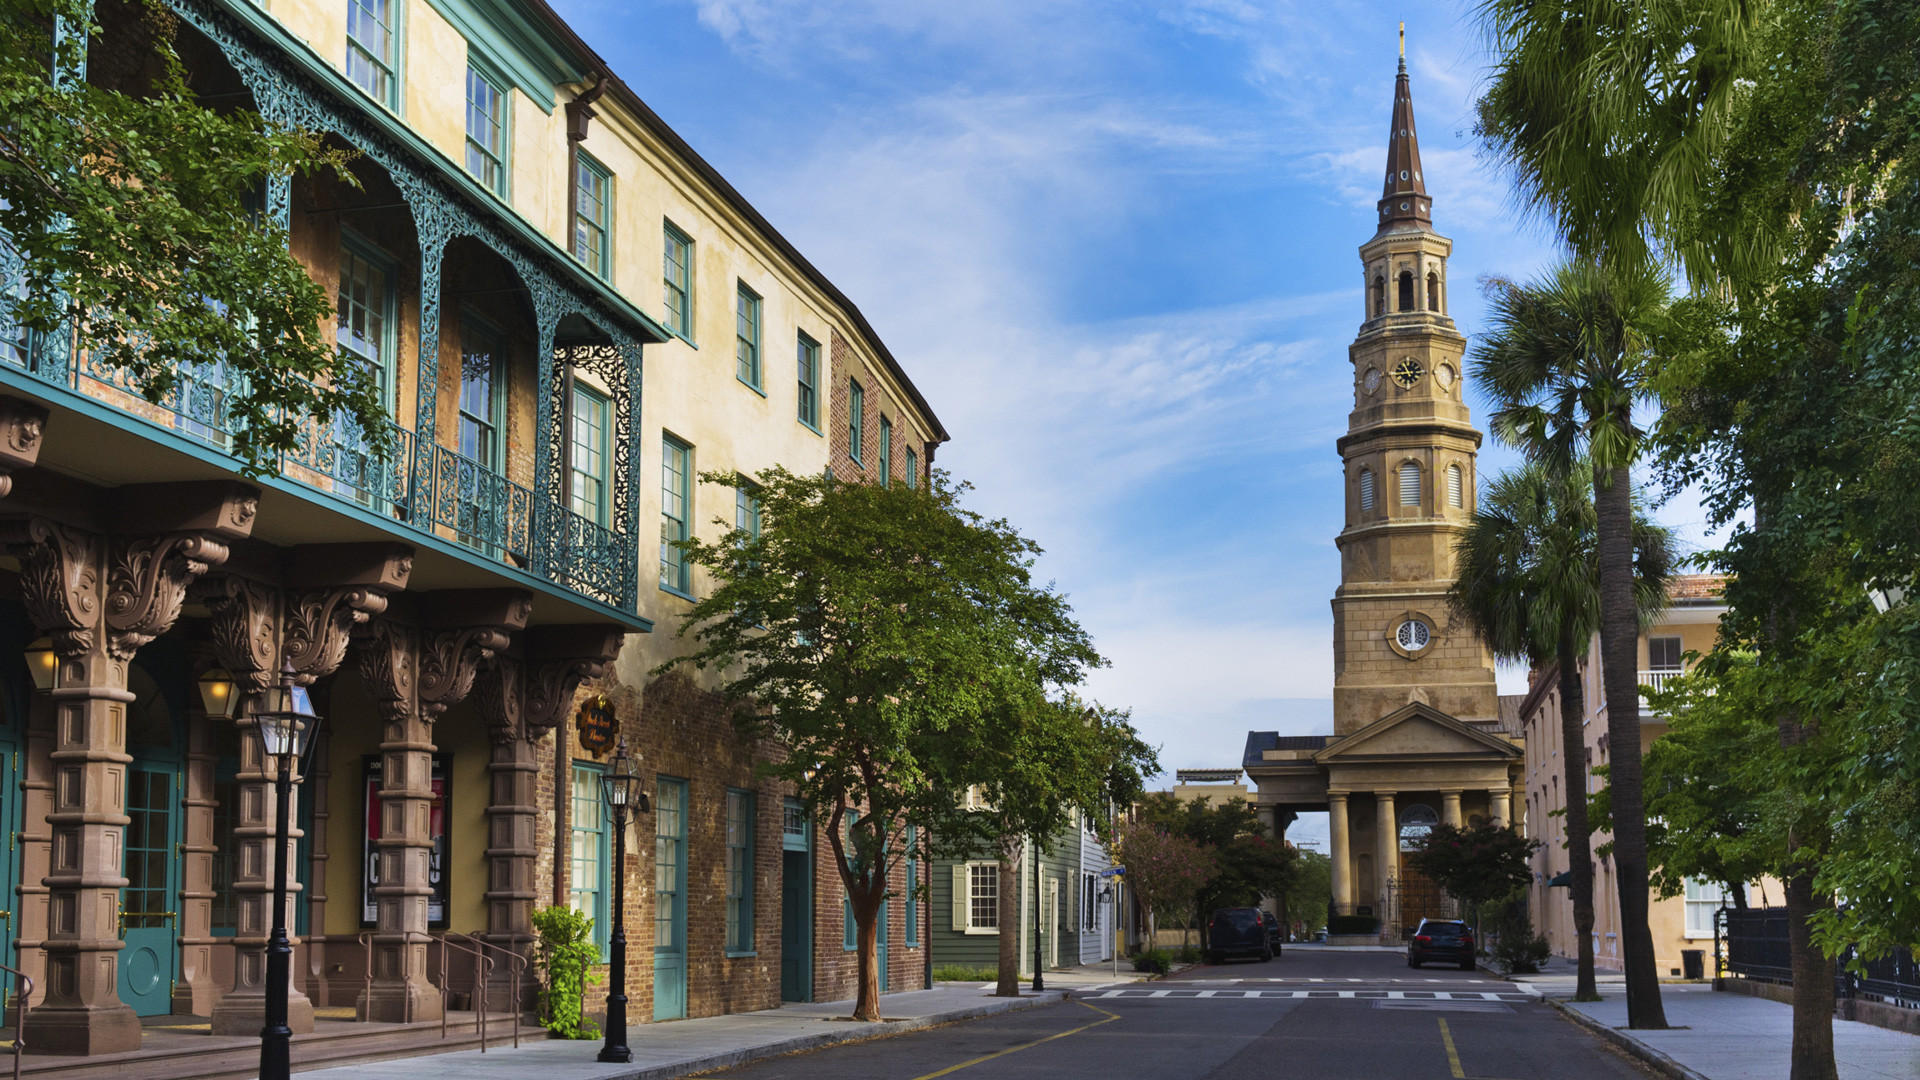 1920x1080 Don't Miss These Diamond-in-the-Rough Hot Spots When You Visit Charleston